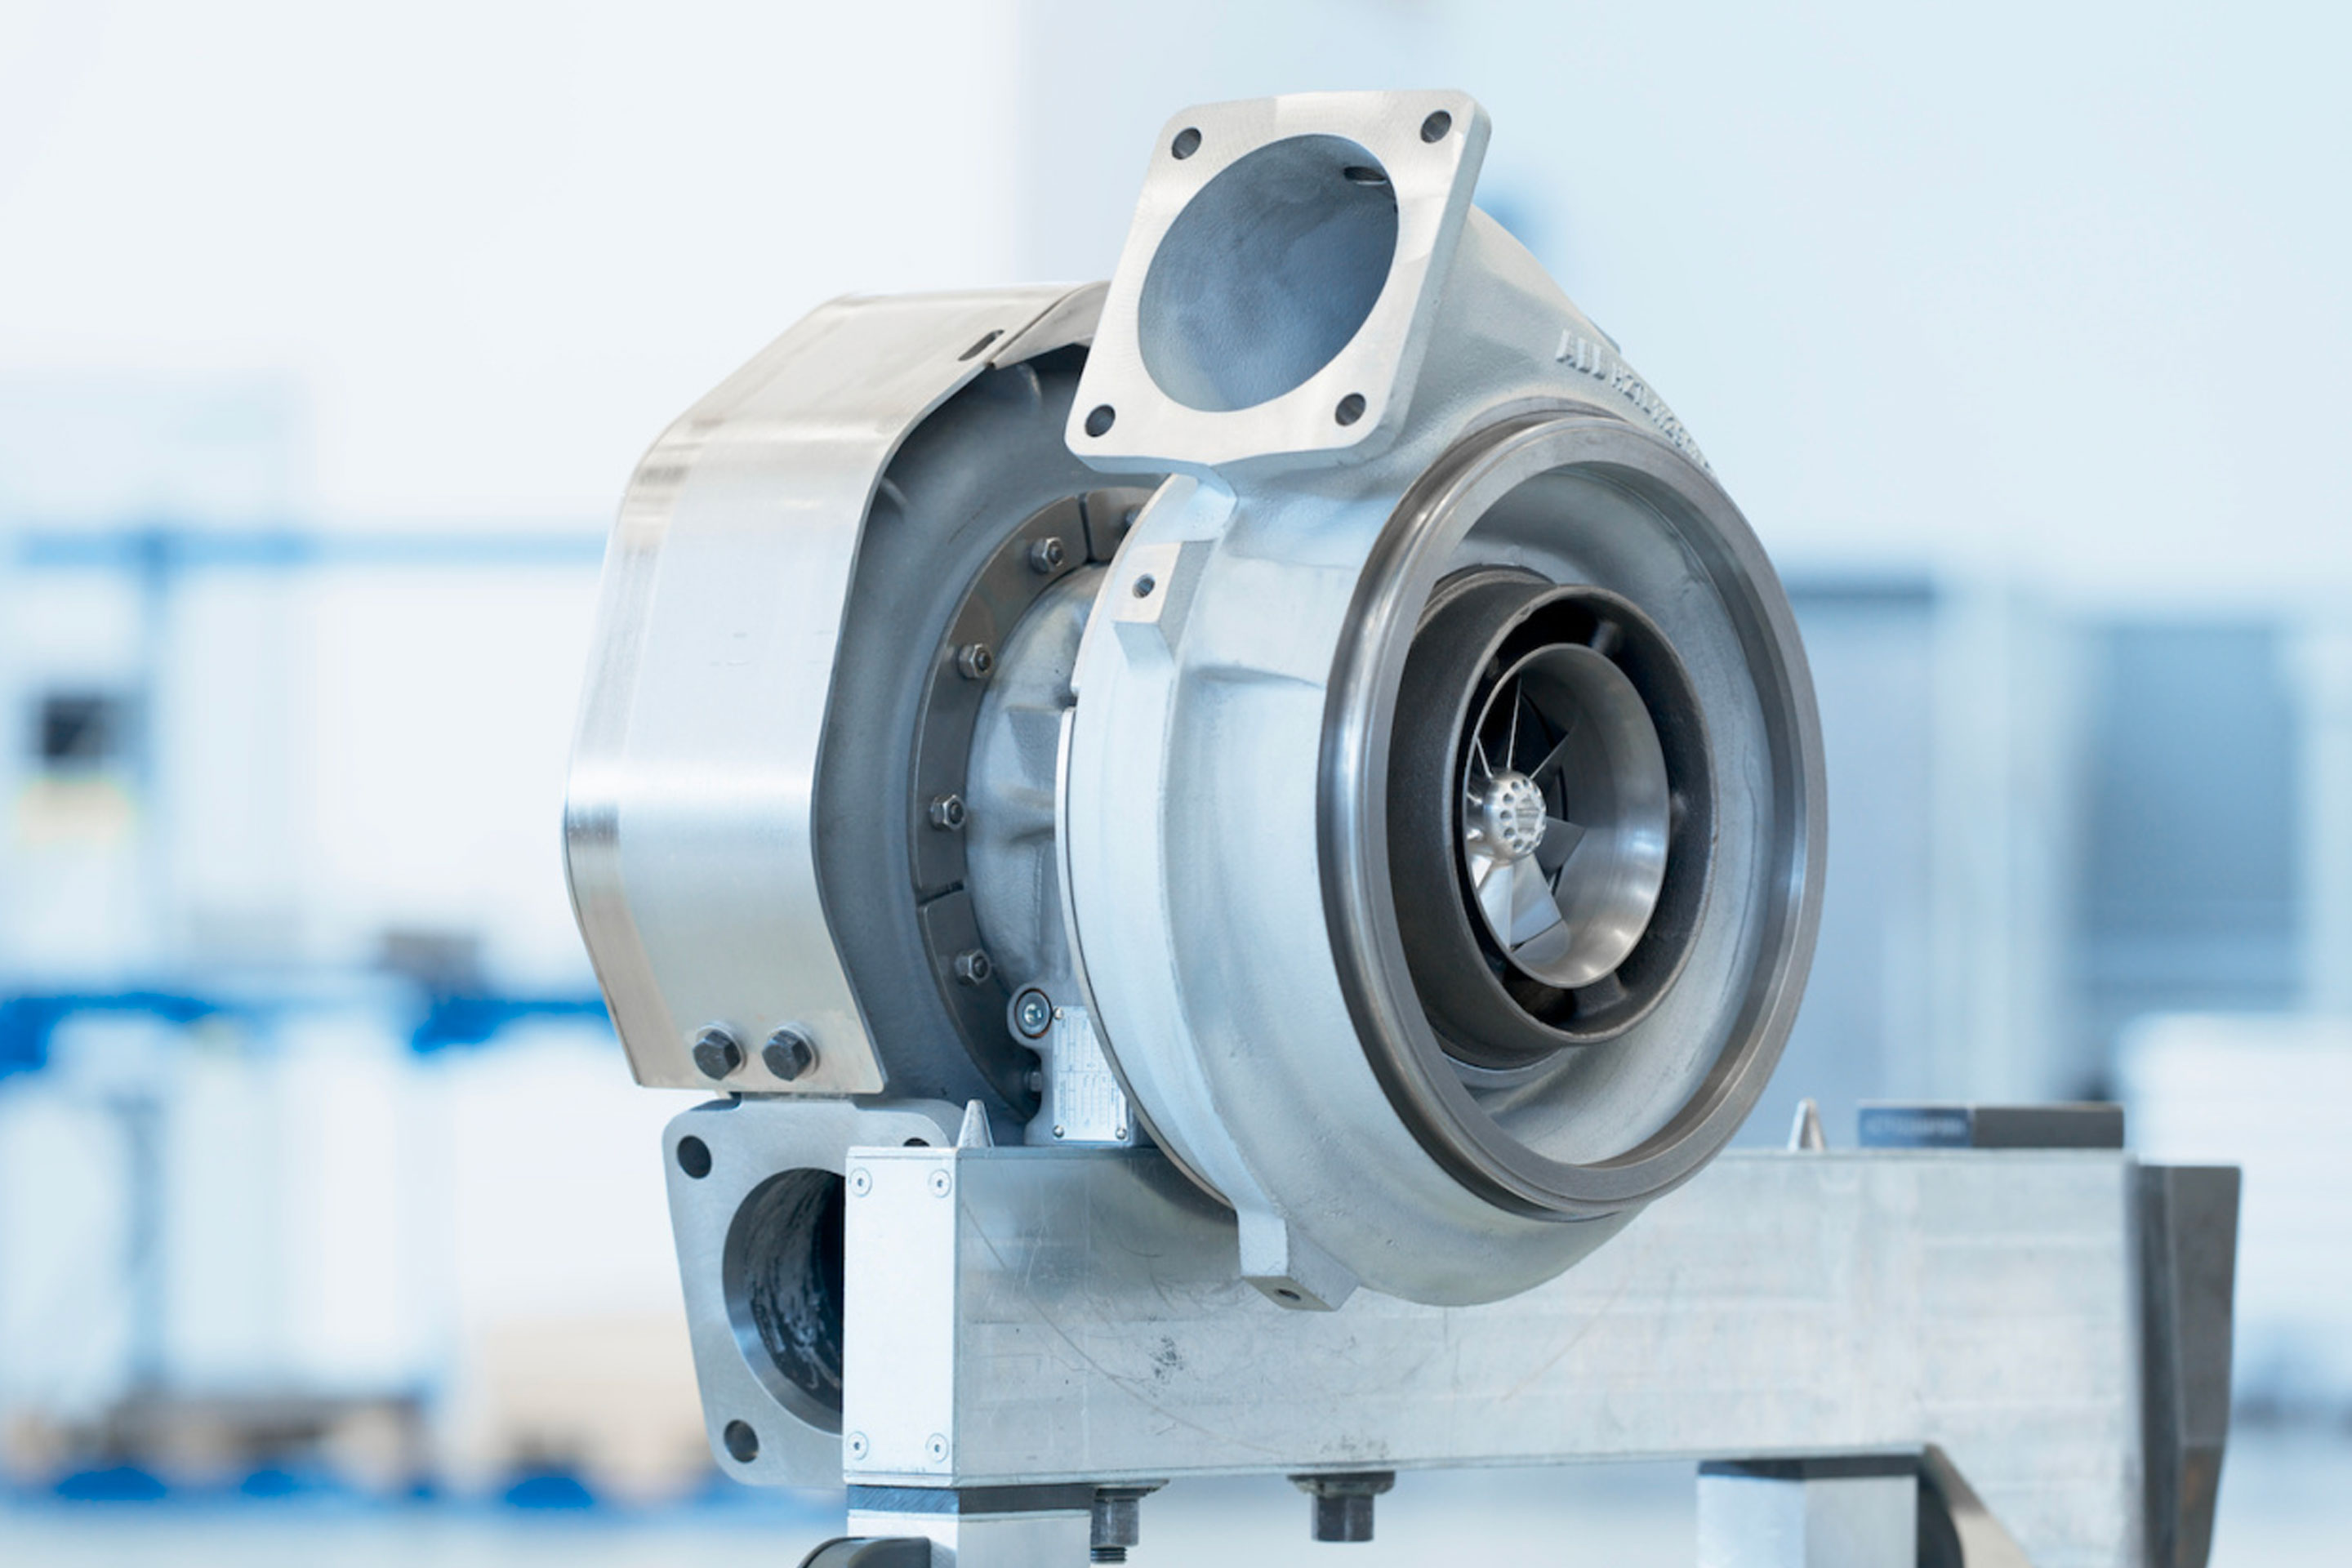 An image of a turbocharger